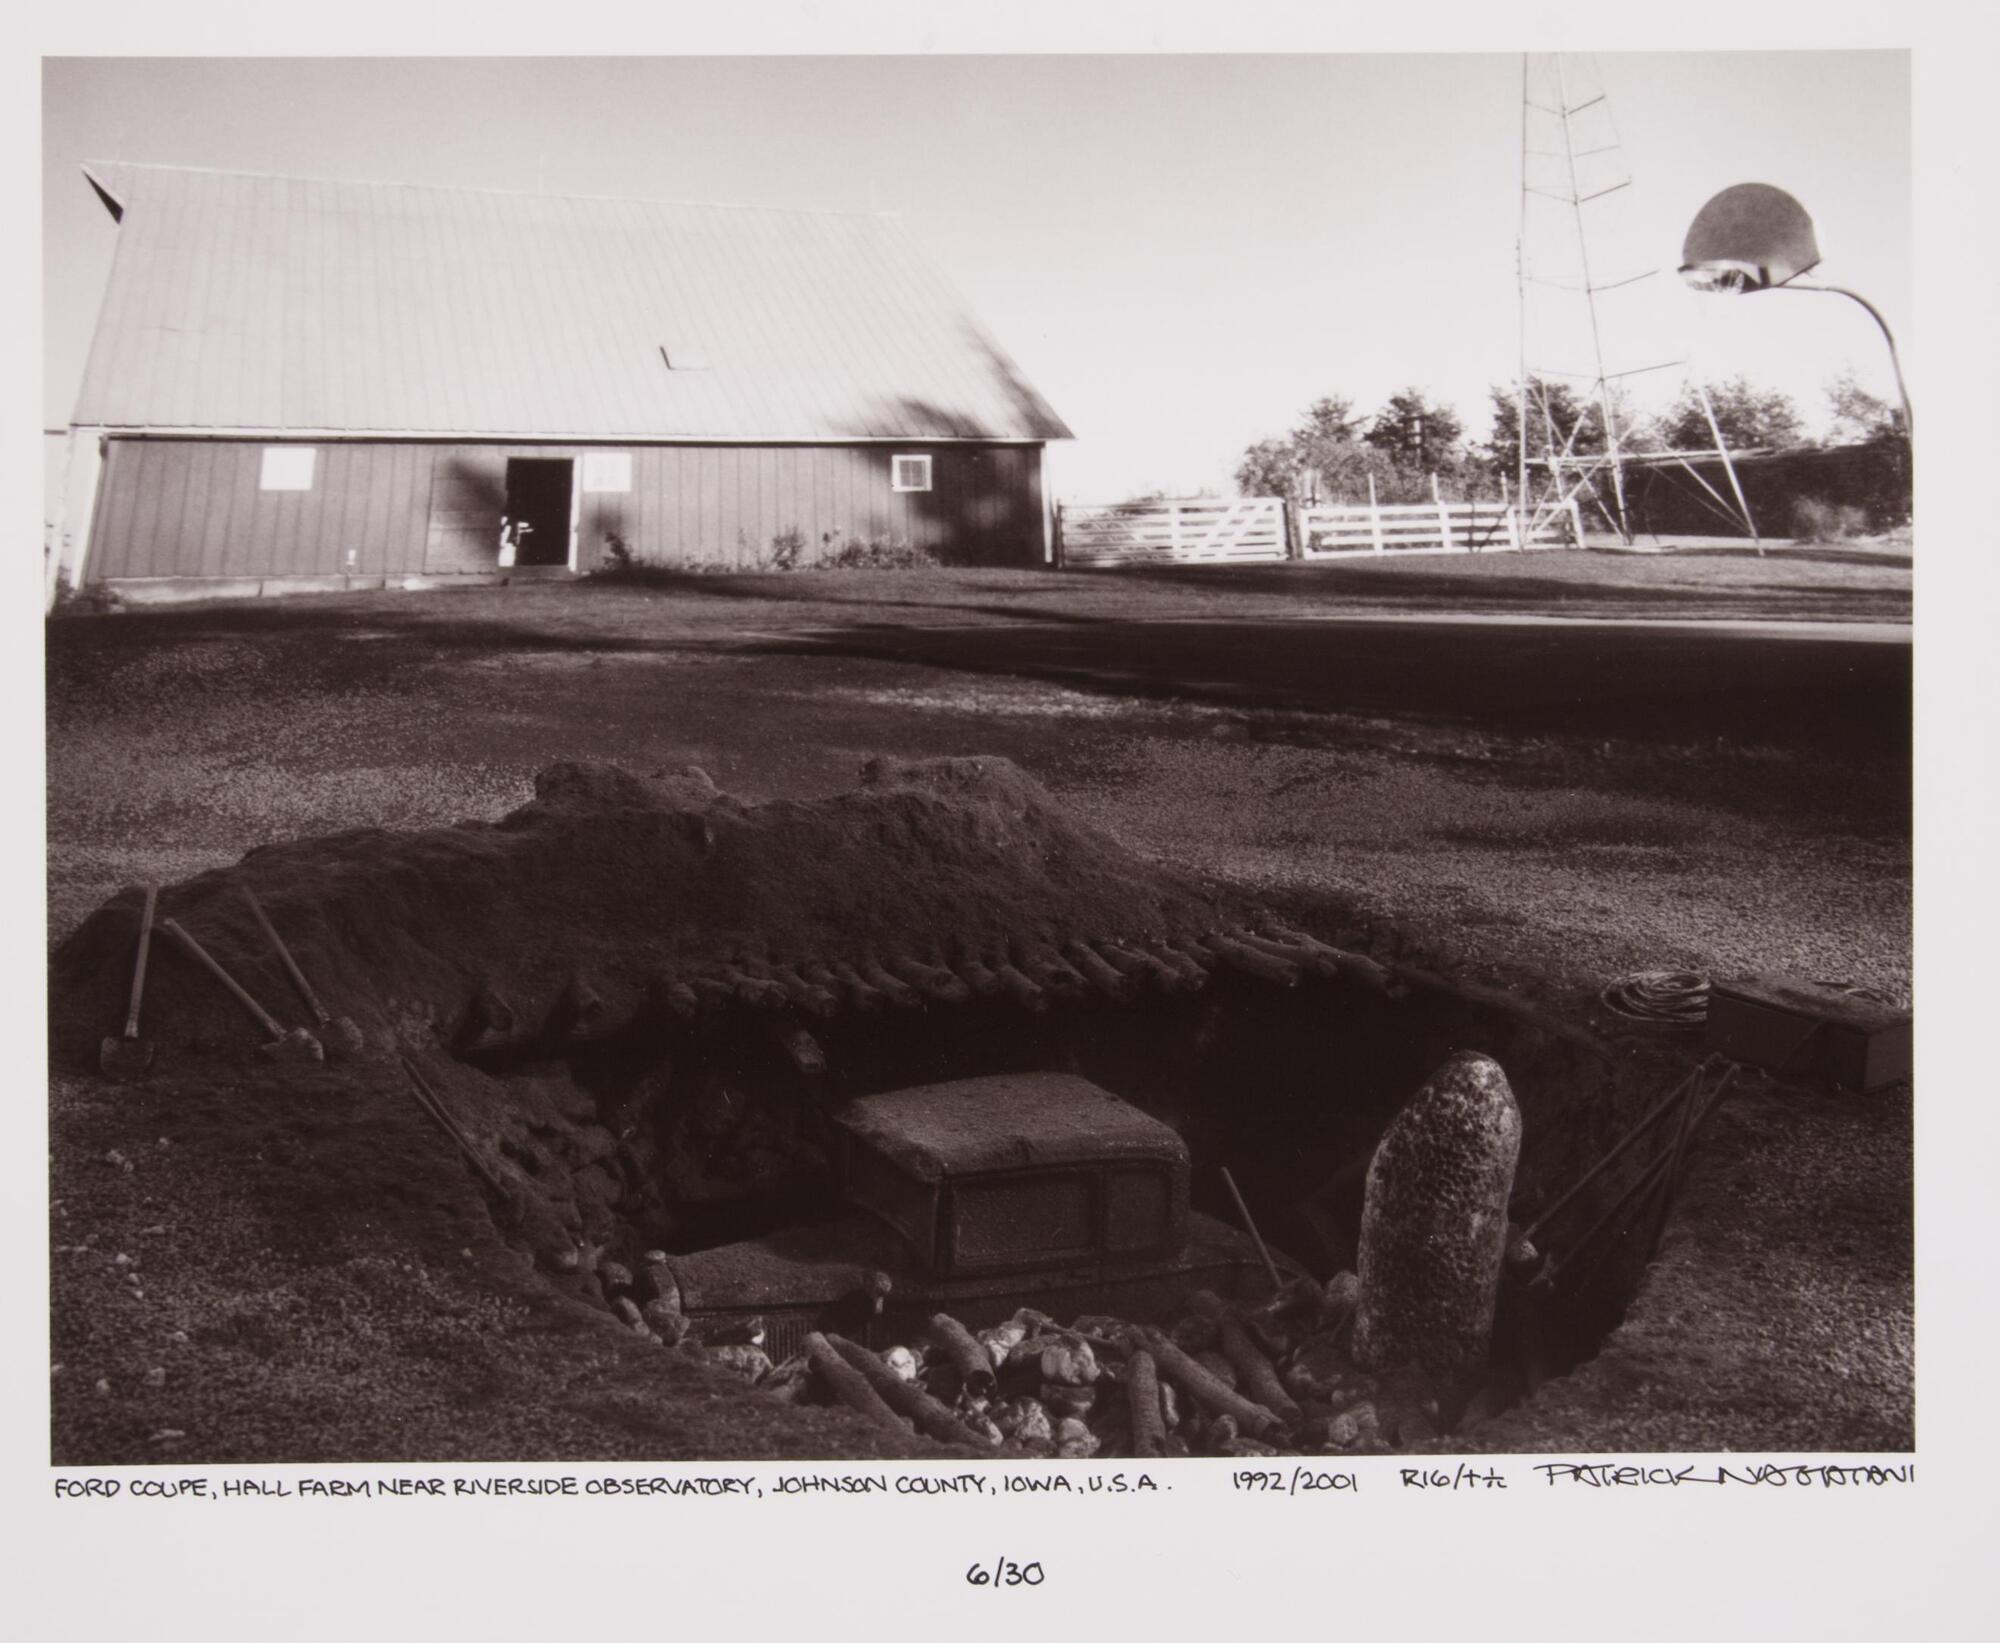 Car under excavation at a farm with a barn in background.